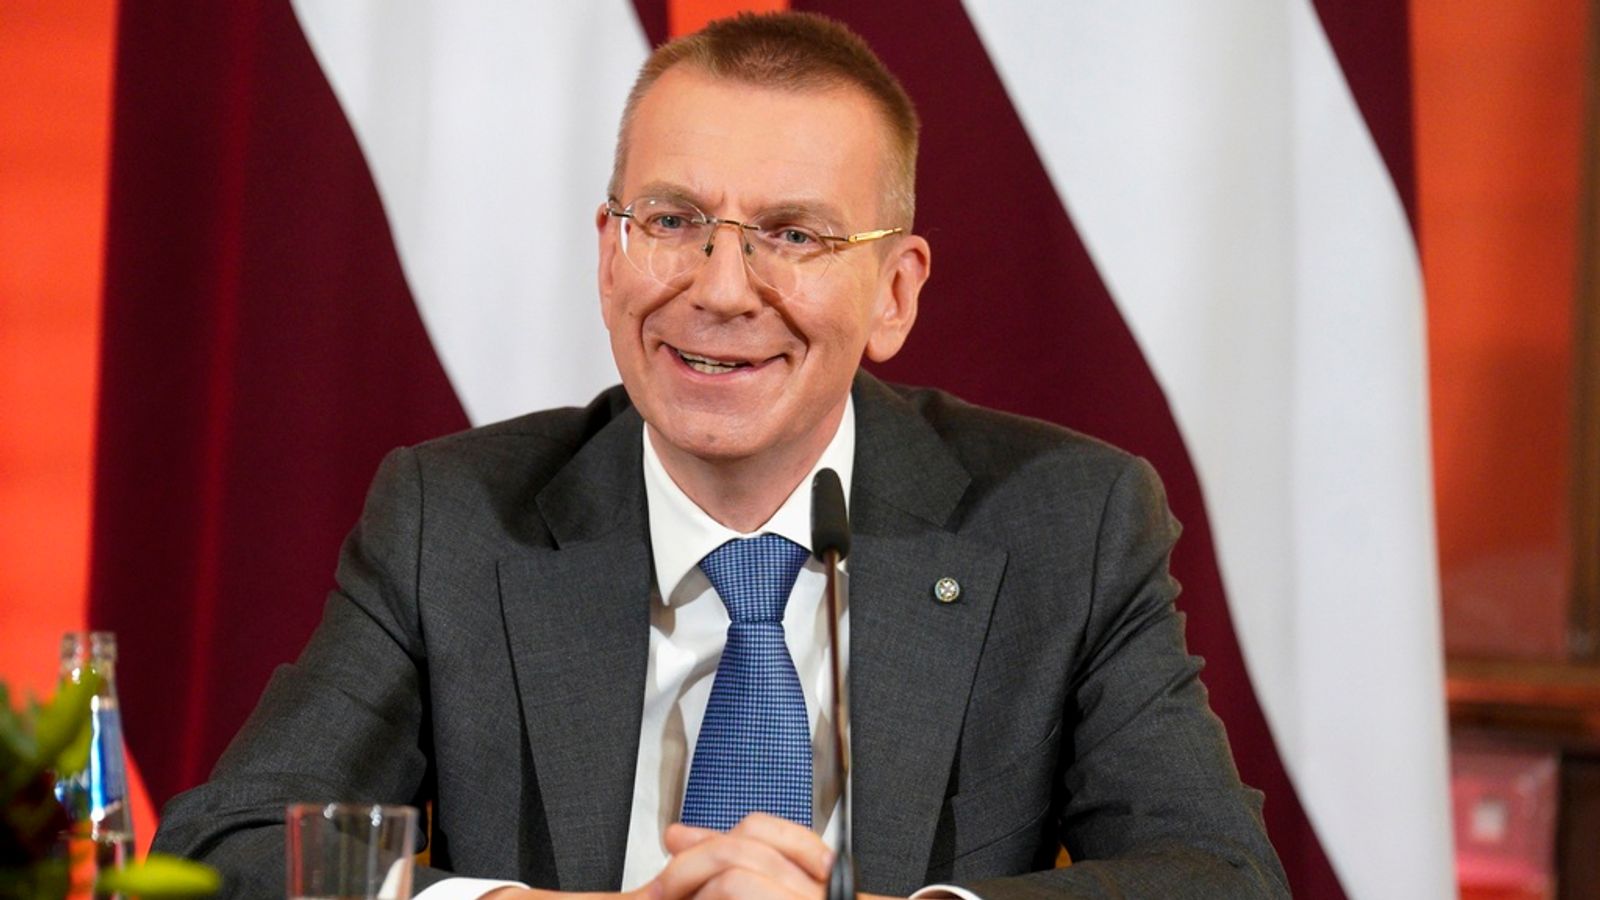 Edgars Rinkevics: European Union's first openly gay head of state sworn in as Latvia's president